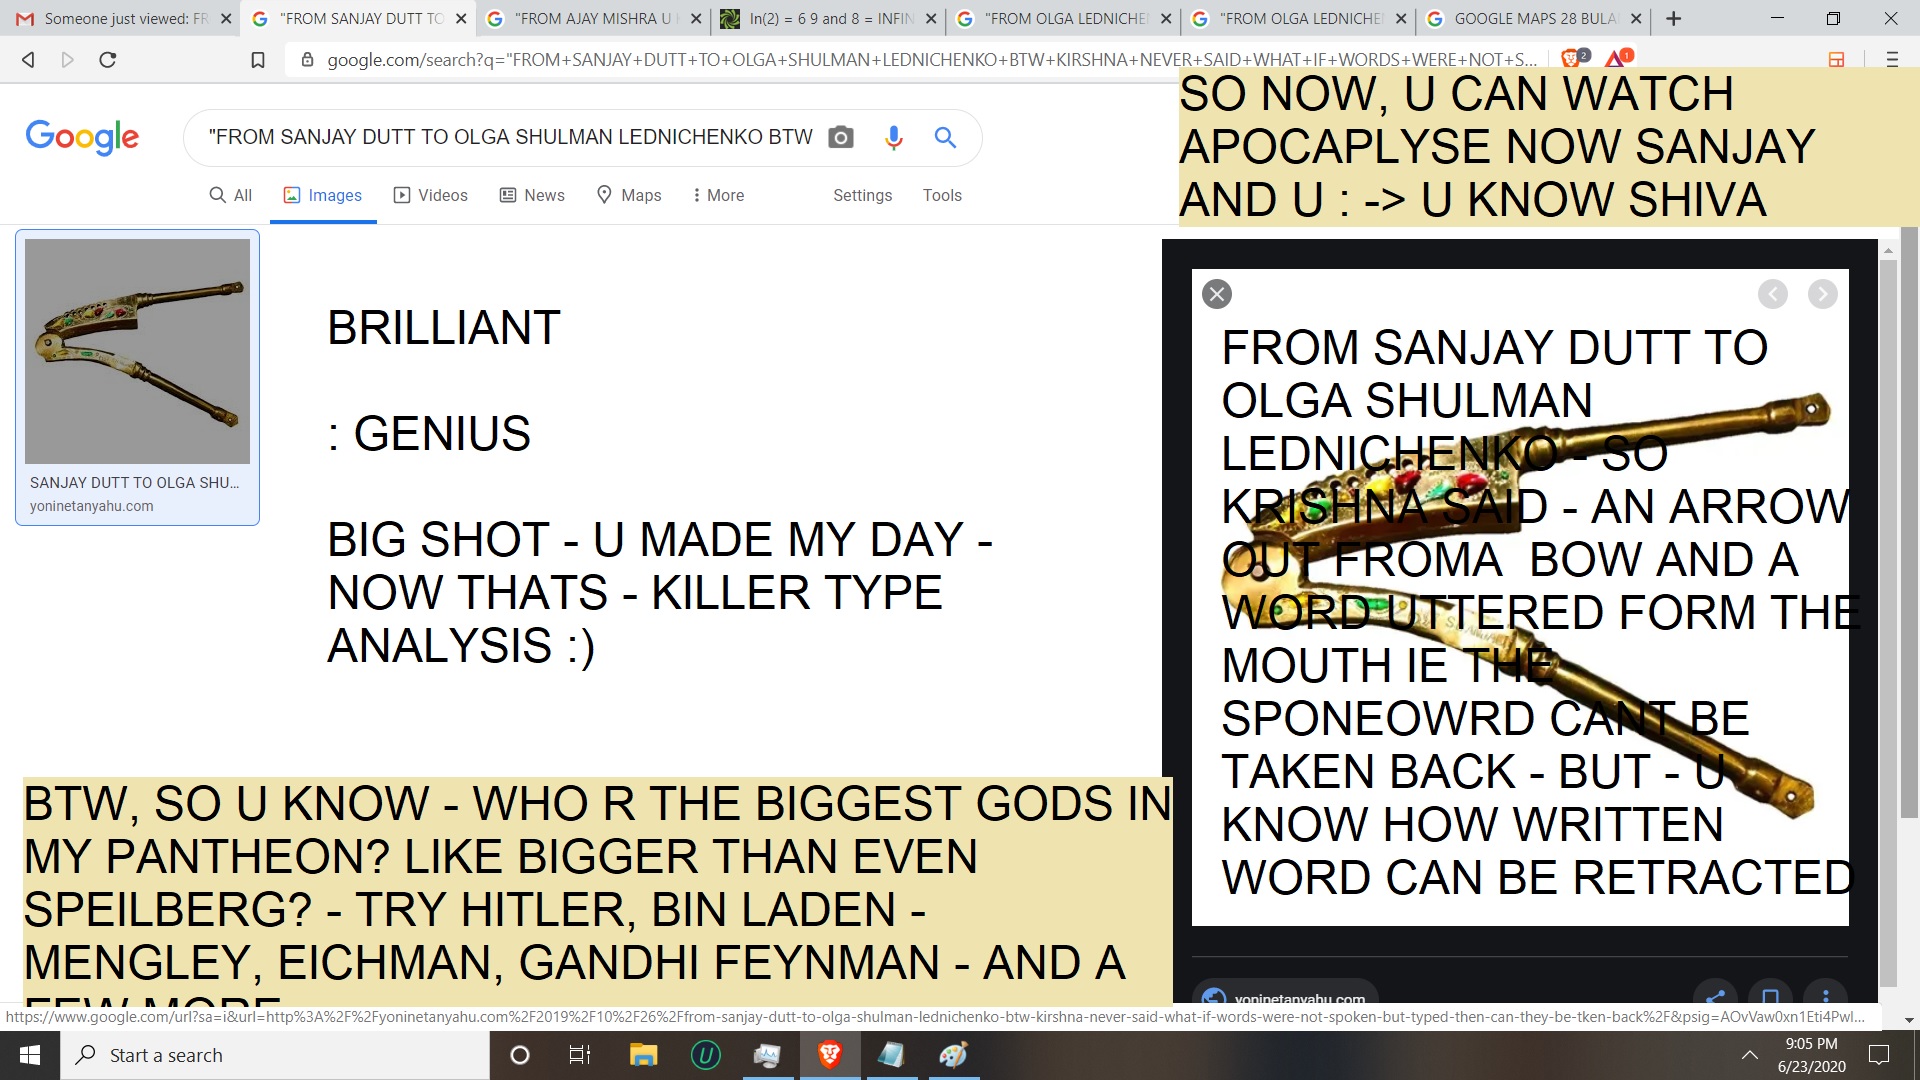 FROM SANJAY DUTT TO OLGA SHULMAN LEDNICHENKO - SO YES WRITTEN WORD SPEICALLY CAN BE RETRACTED